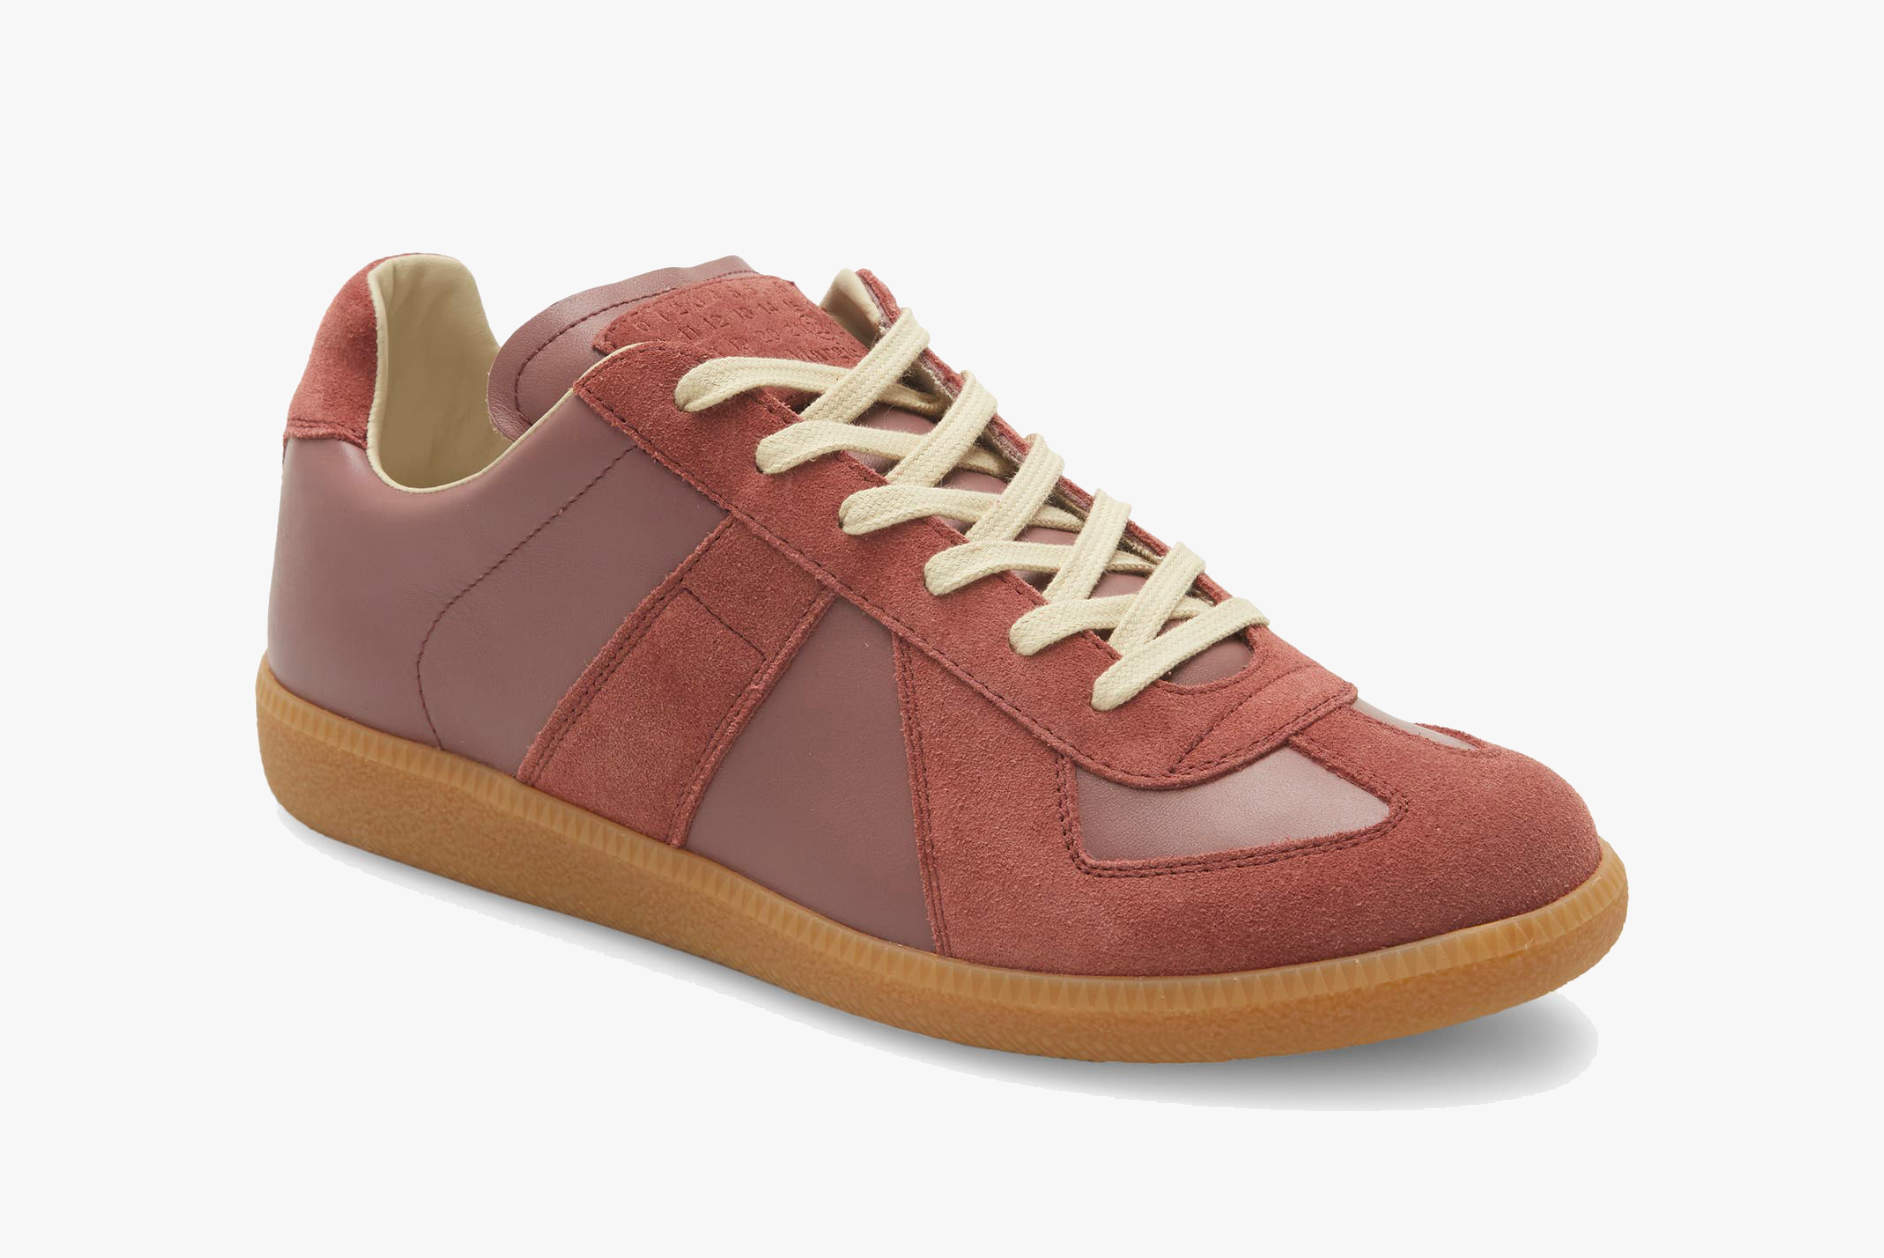 Shop the Maison Margiela Replica on Sale at Nordstrom Here